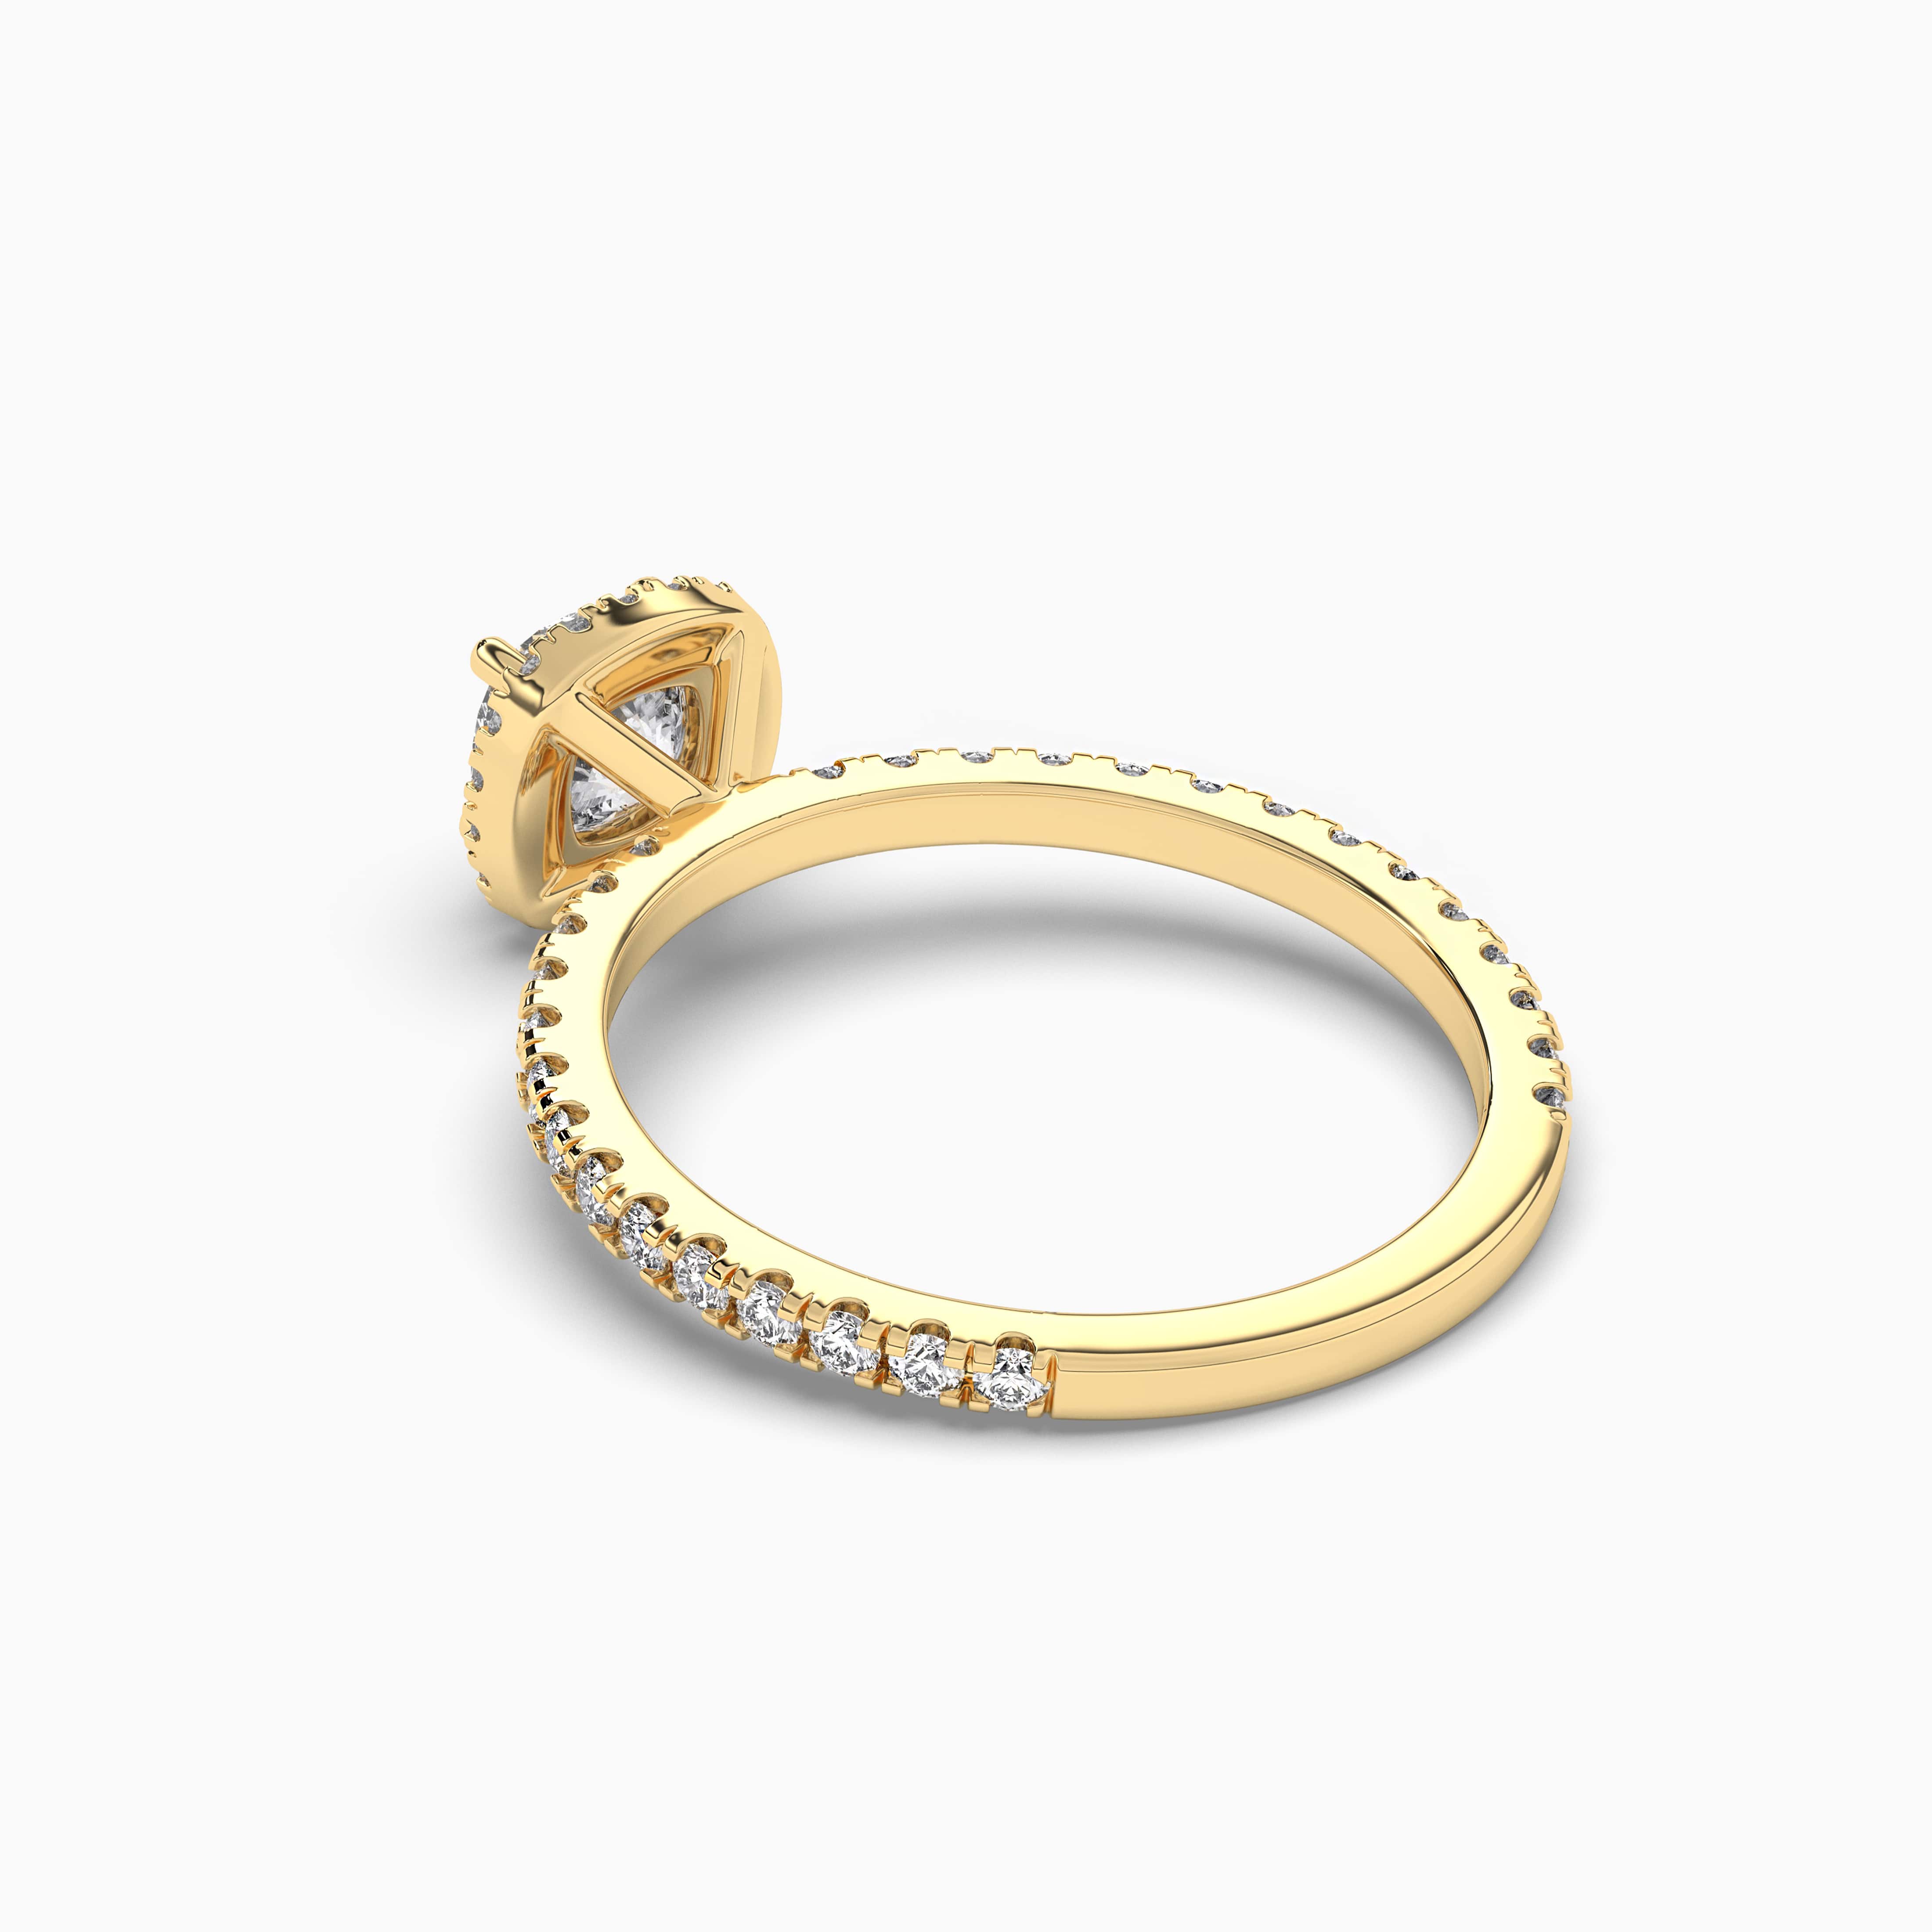 CUSHION CUT DIAMOND ENGAGEMENT RING WITH A DOUBLE HALO THREE PHASES SLIM SETTING IN YELLOW GOLD